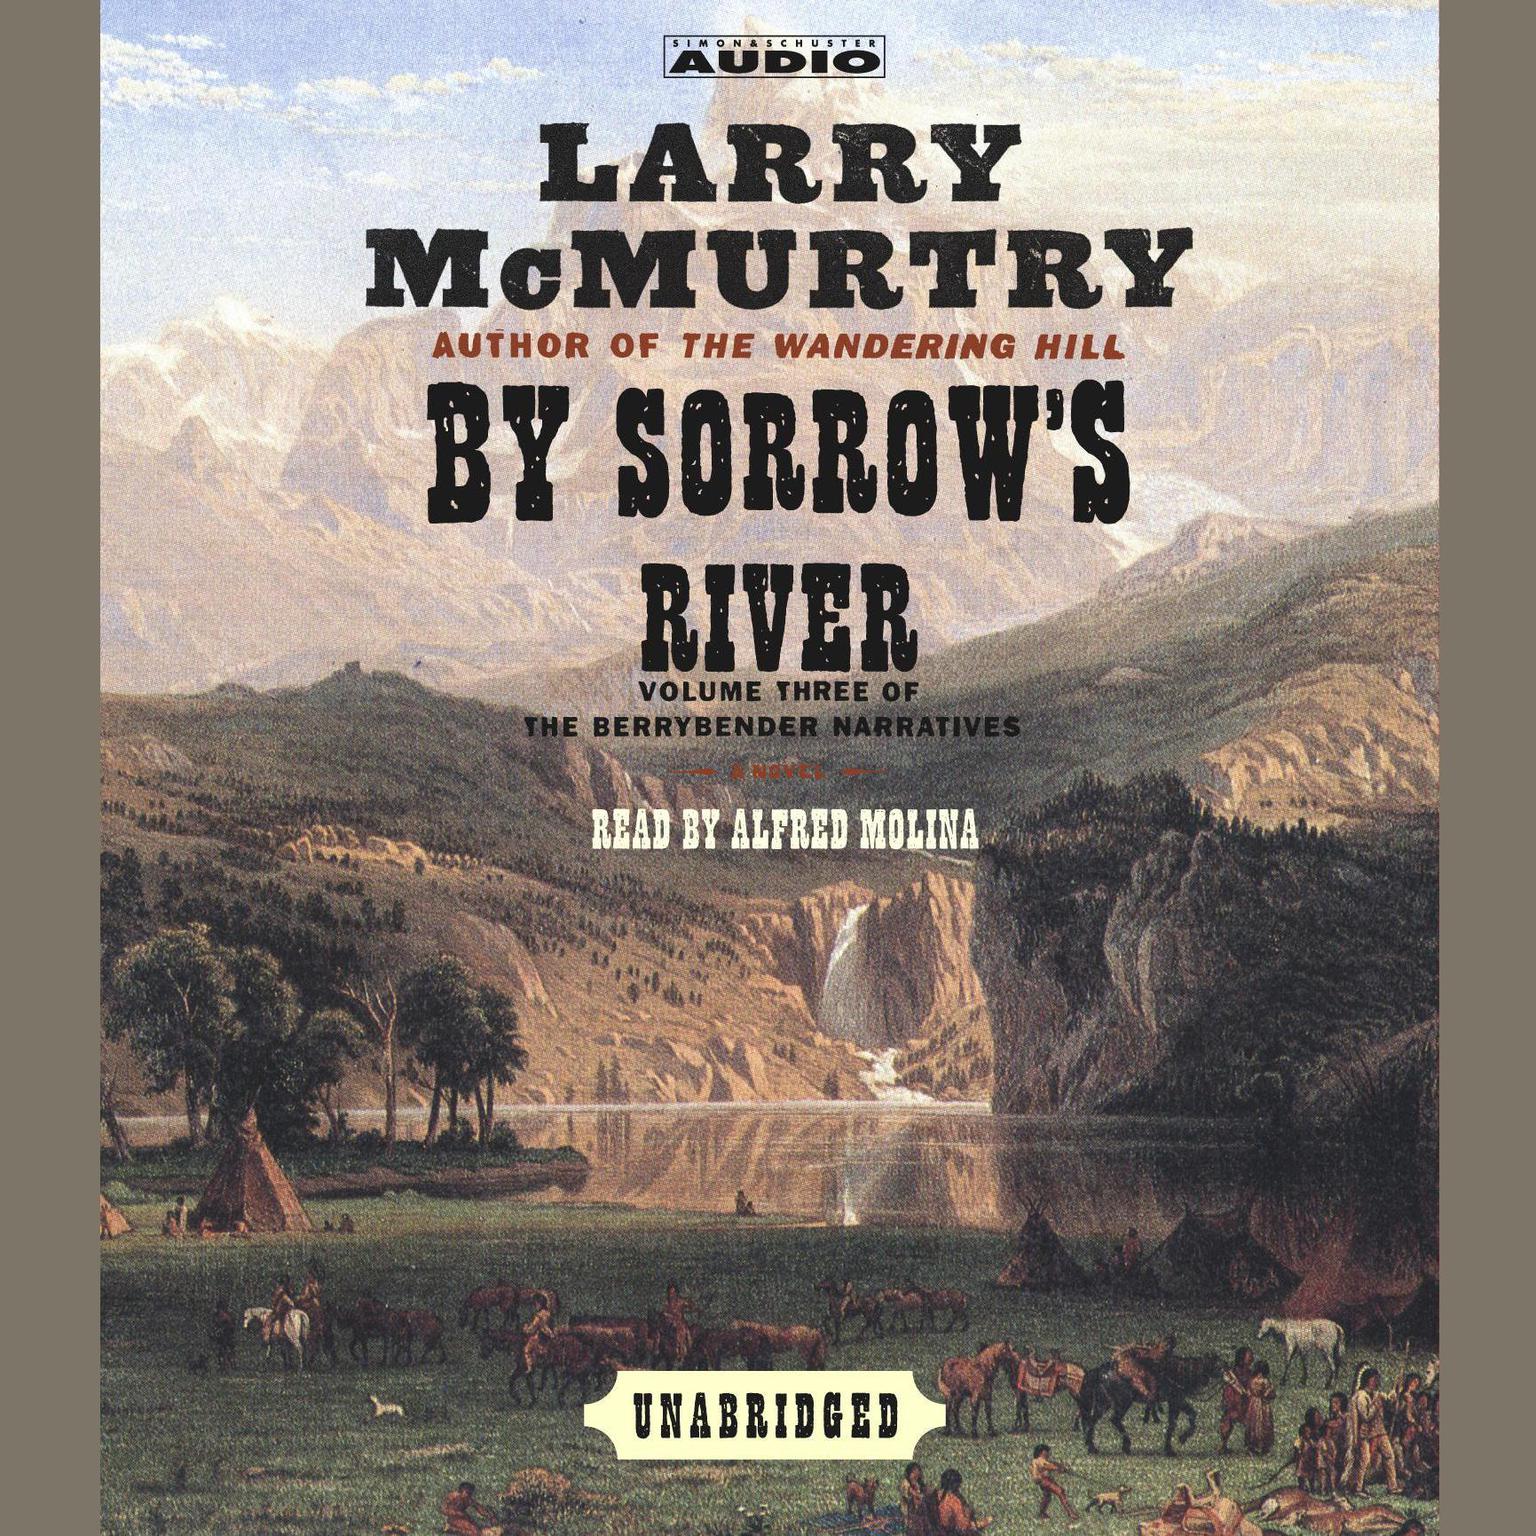 By Sorrows River: A Novel Audiobook, by Larry McMurtry